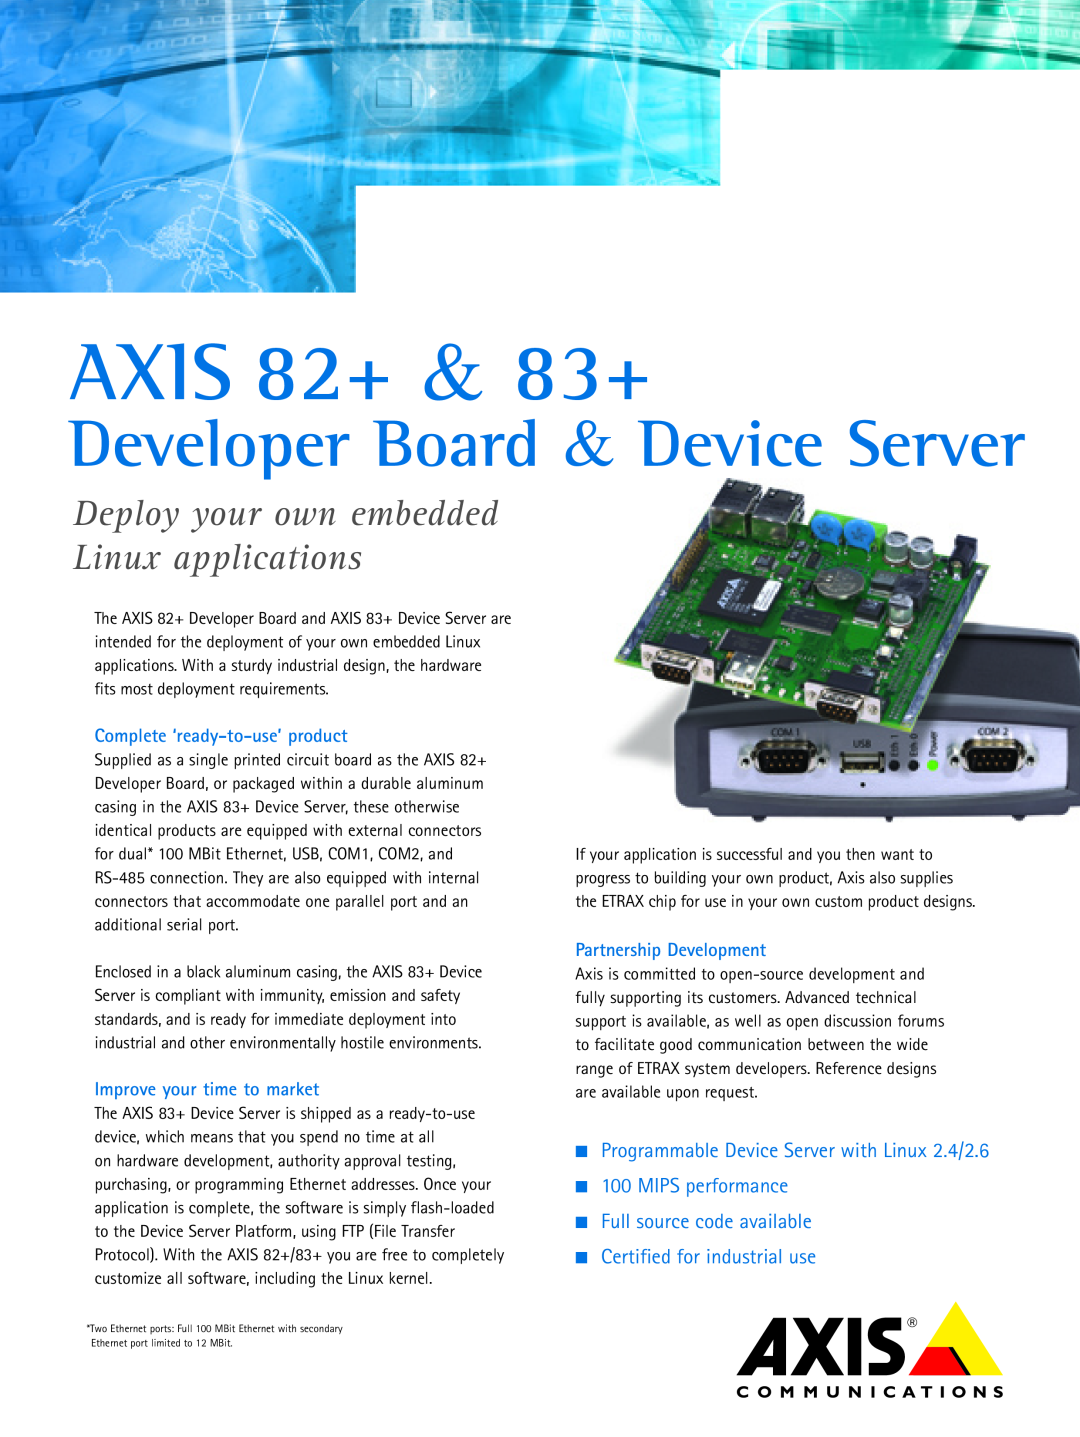 Axis Communications manual AXIS 82+ & 83+, Developer Board & Device Server, Deploy your own embedded Linux applications 